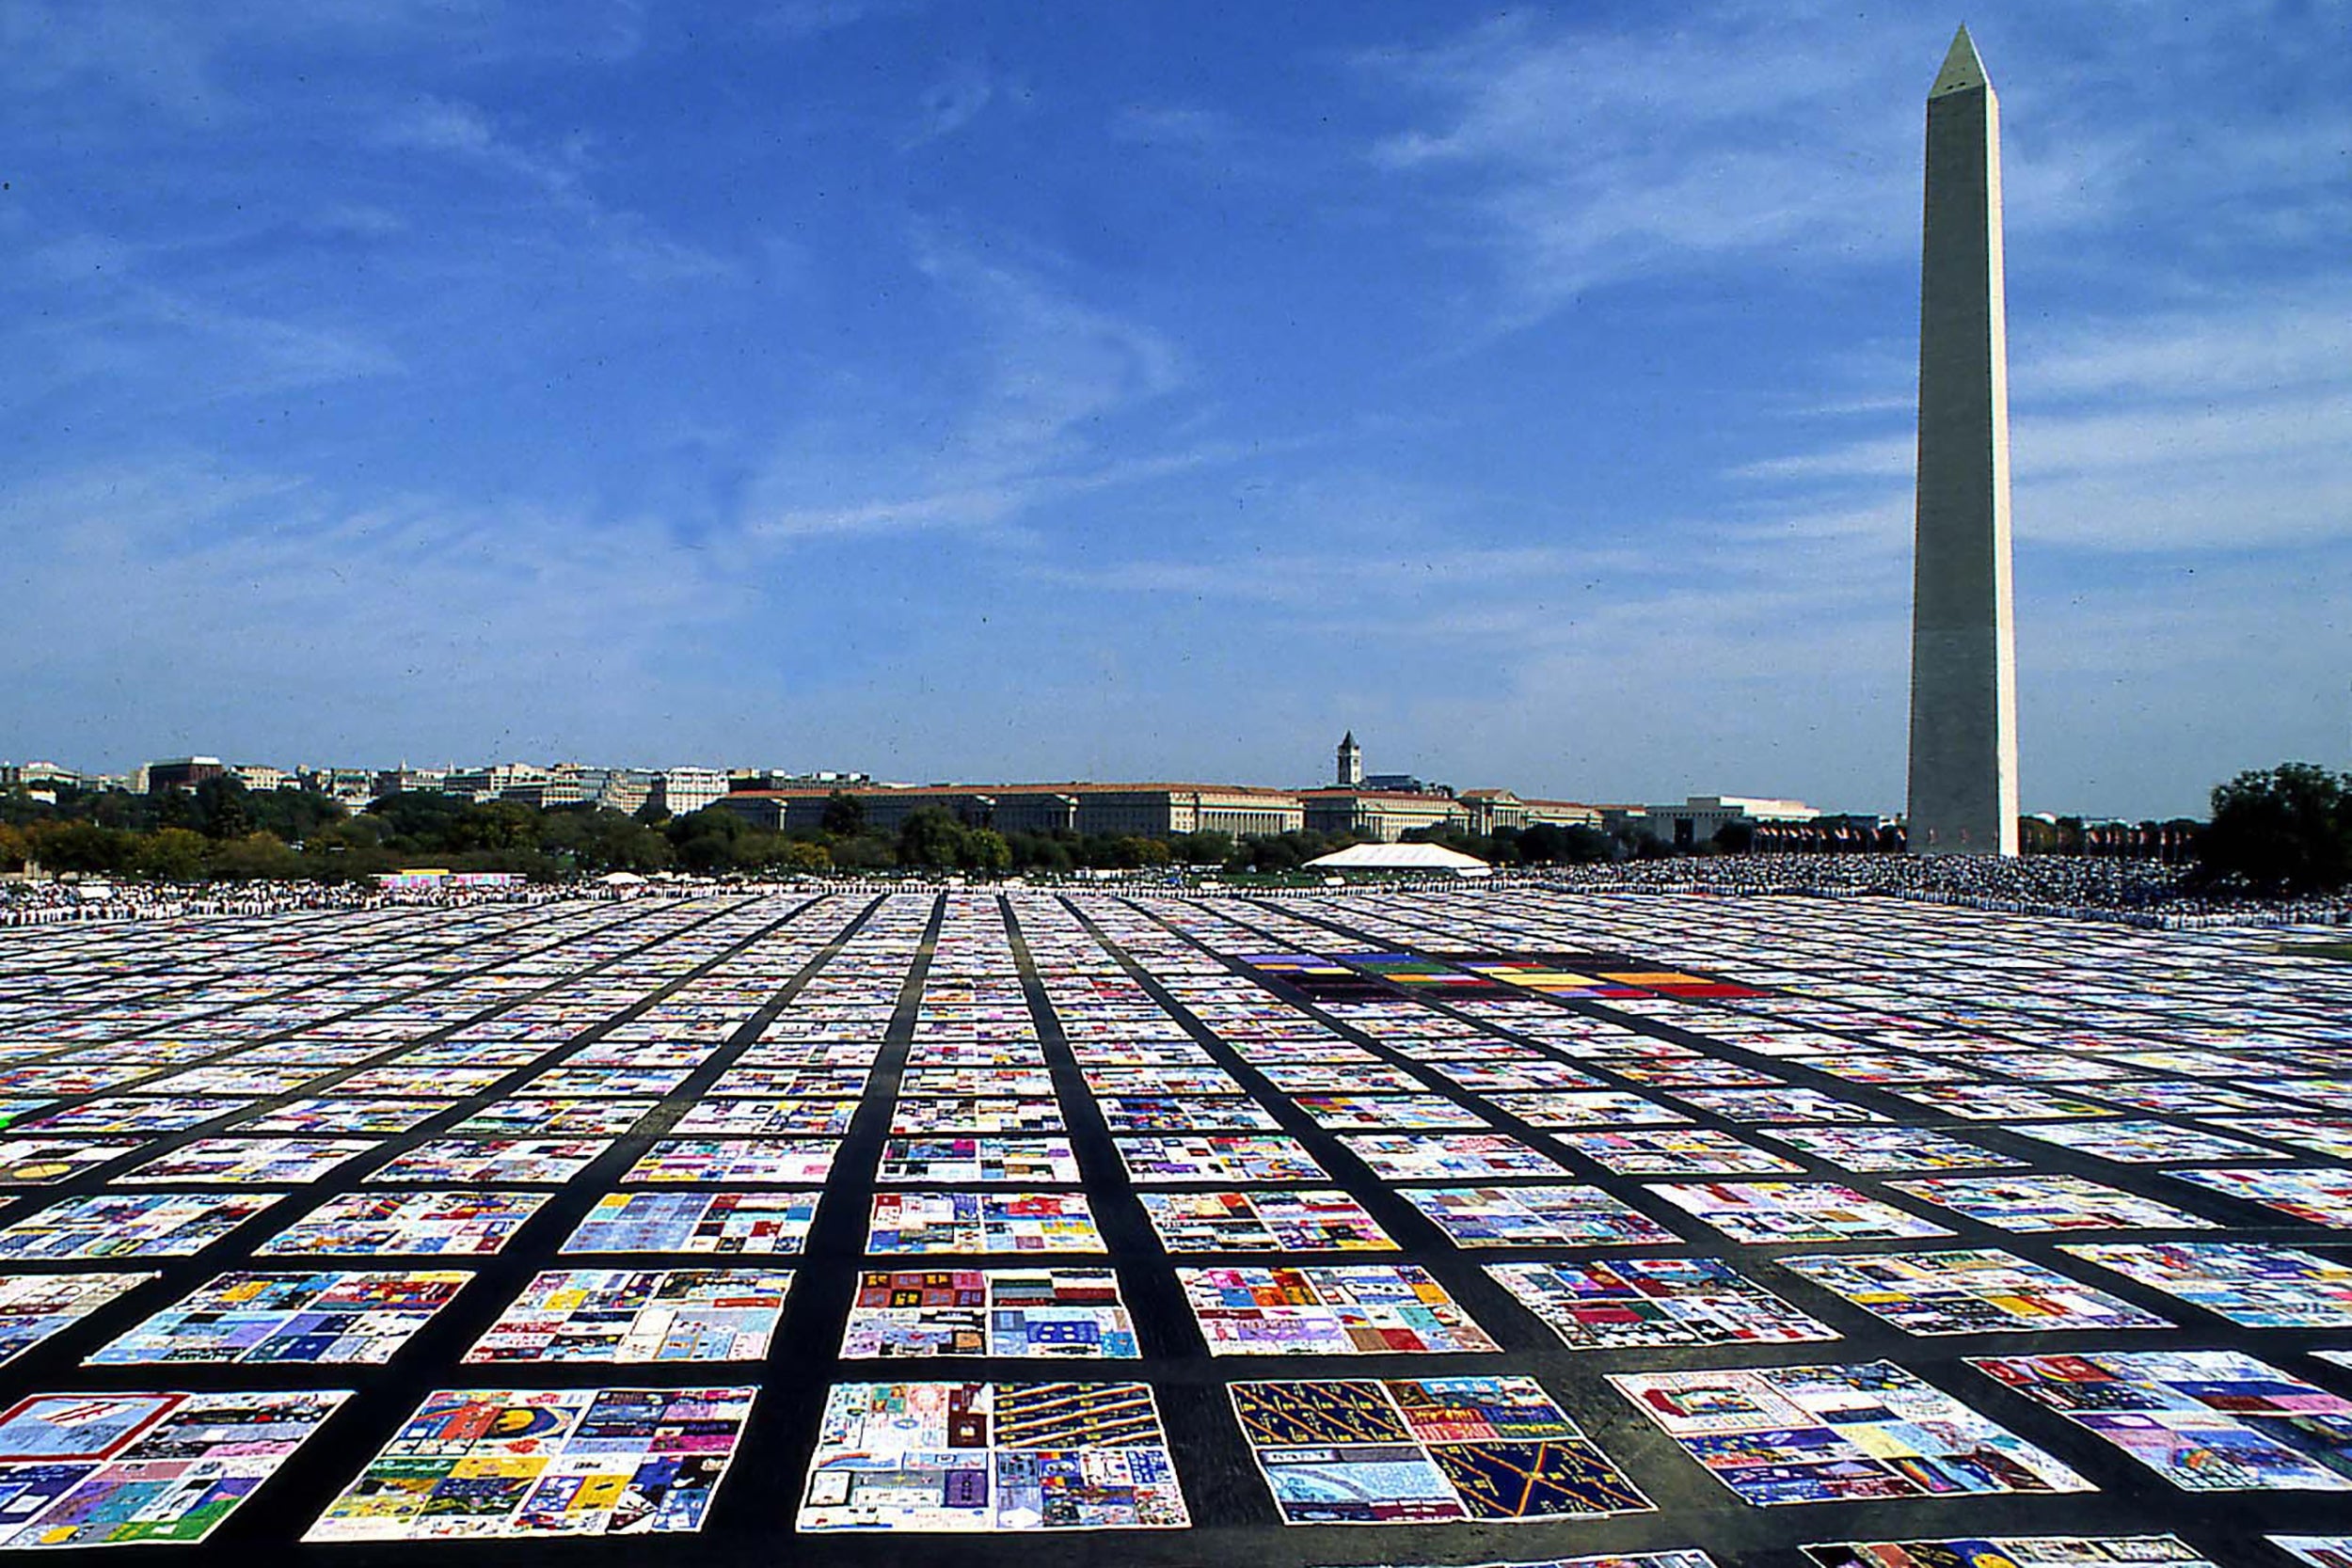 he AIDS quilt in front of the Washington Monument